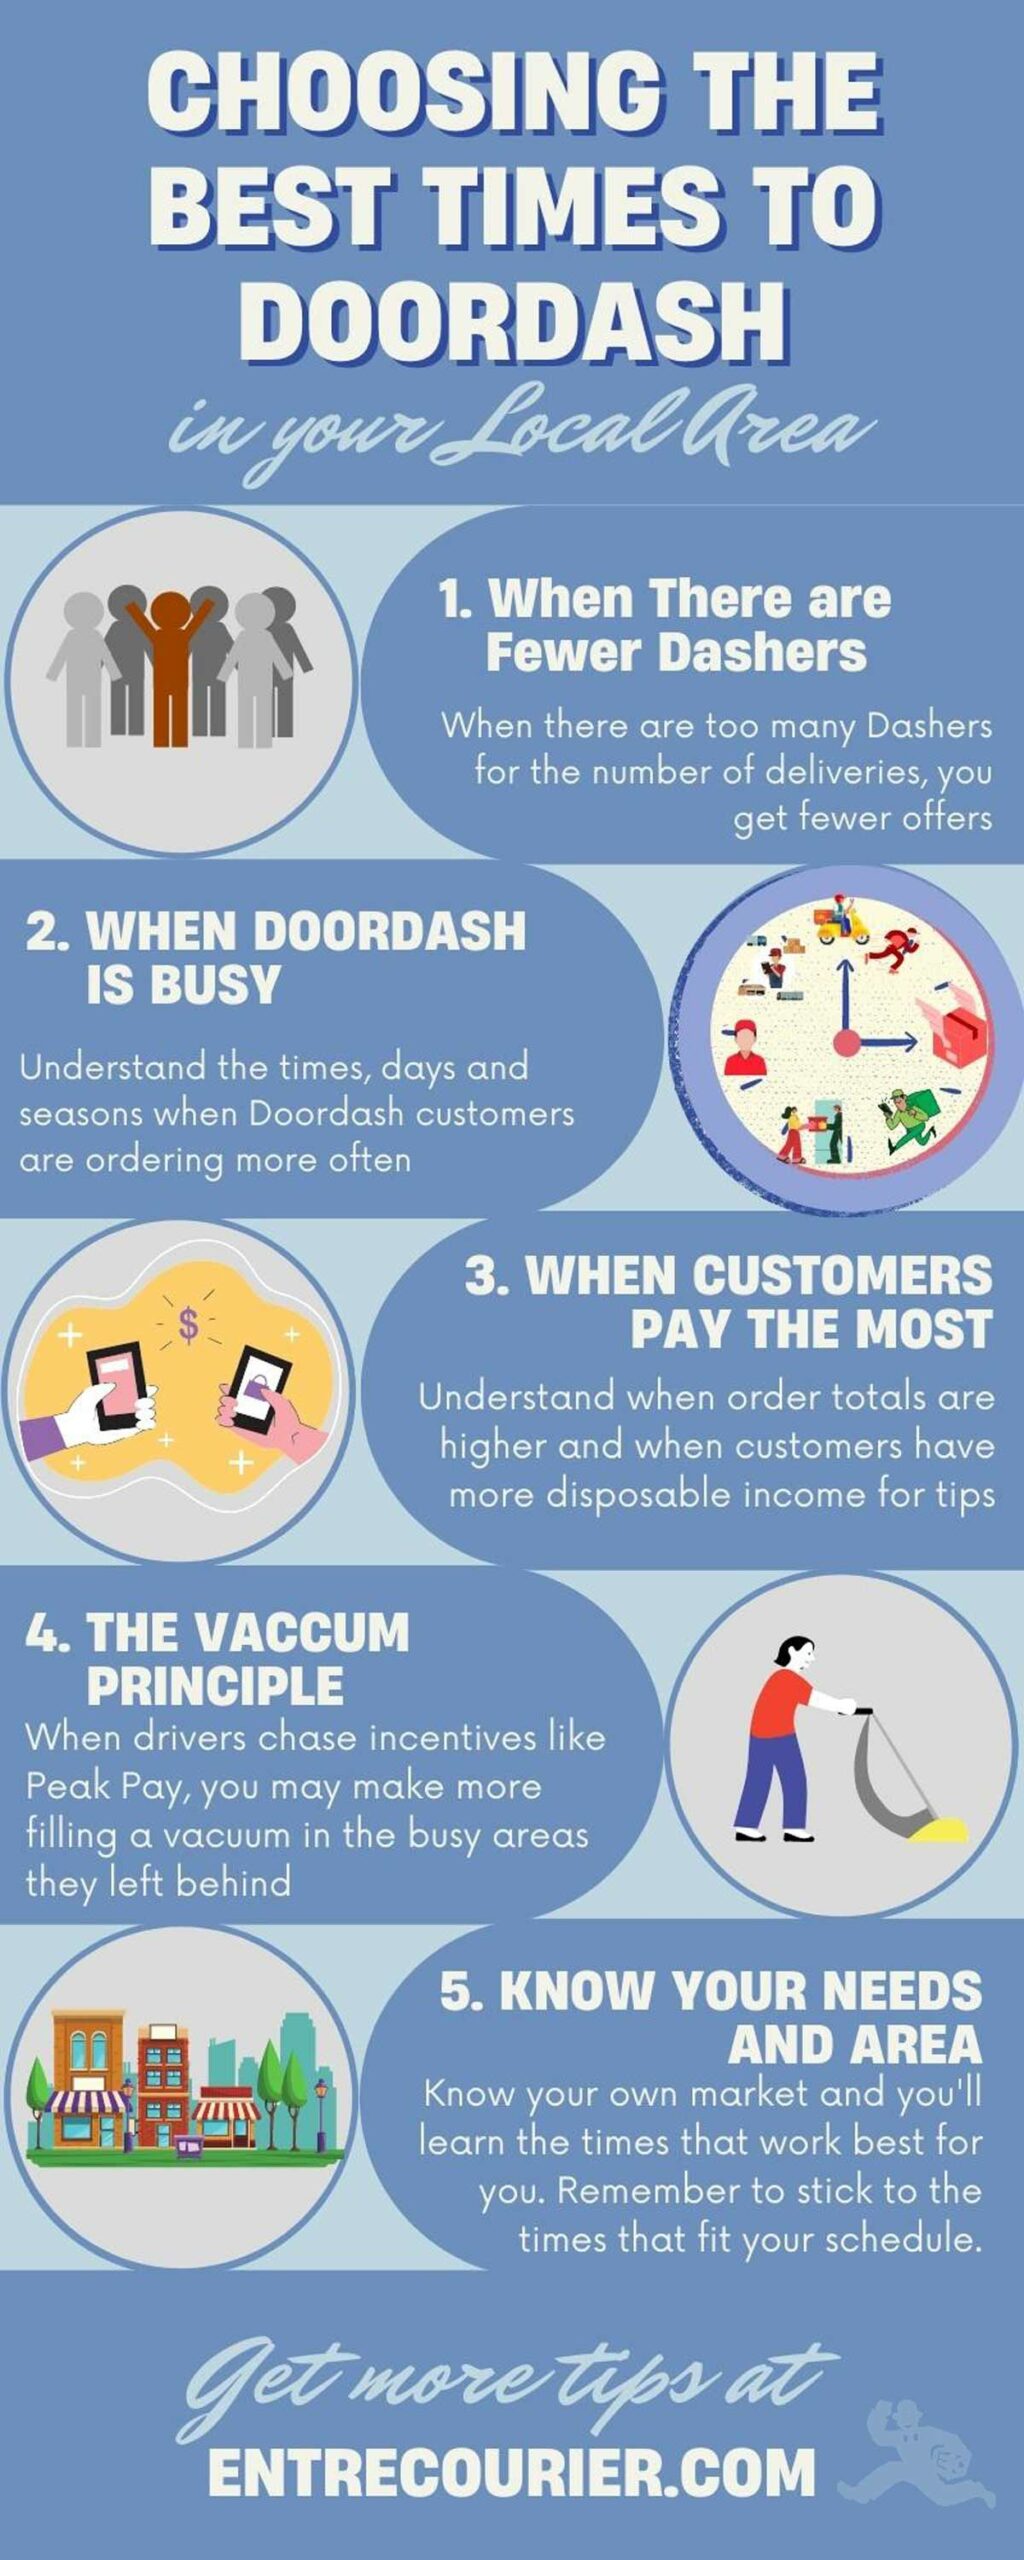 Infographic about choosing the best times to deliver on Doordash with five points including when there are fewer dashers, when Doordash is busy, When customers pay most, Know the vacuum principle, and know your needs and areas.